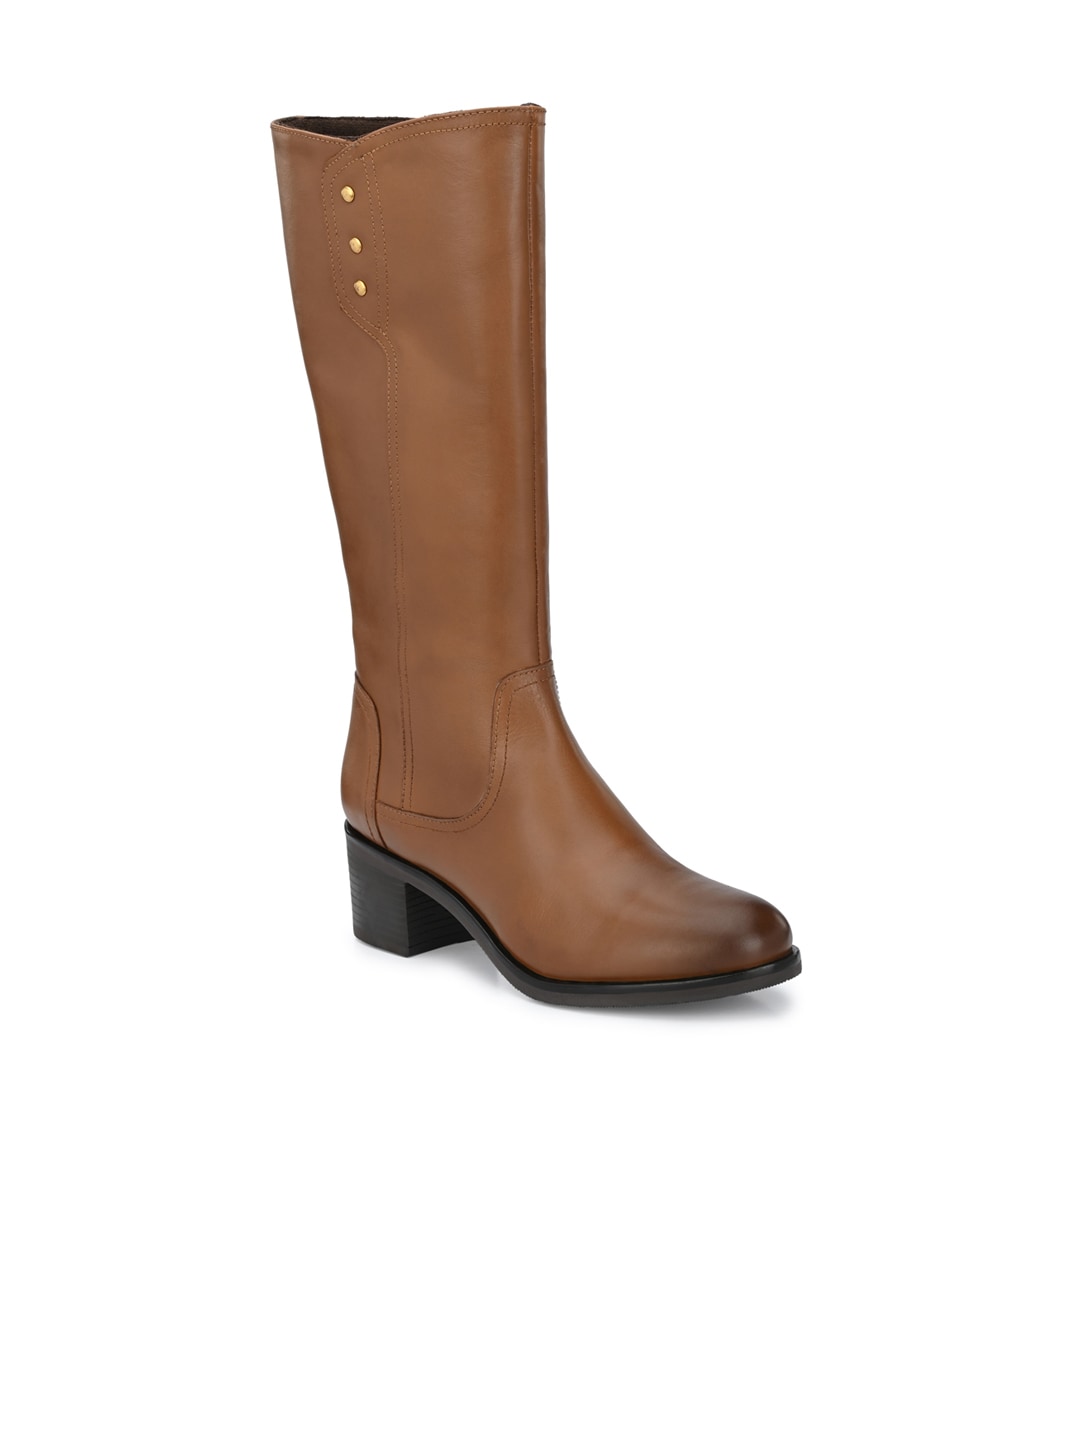 Delize Tan High-Top Block Heeled Boots Price in India